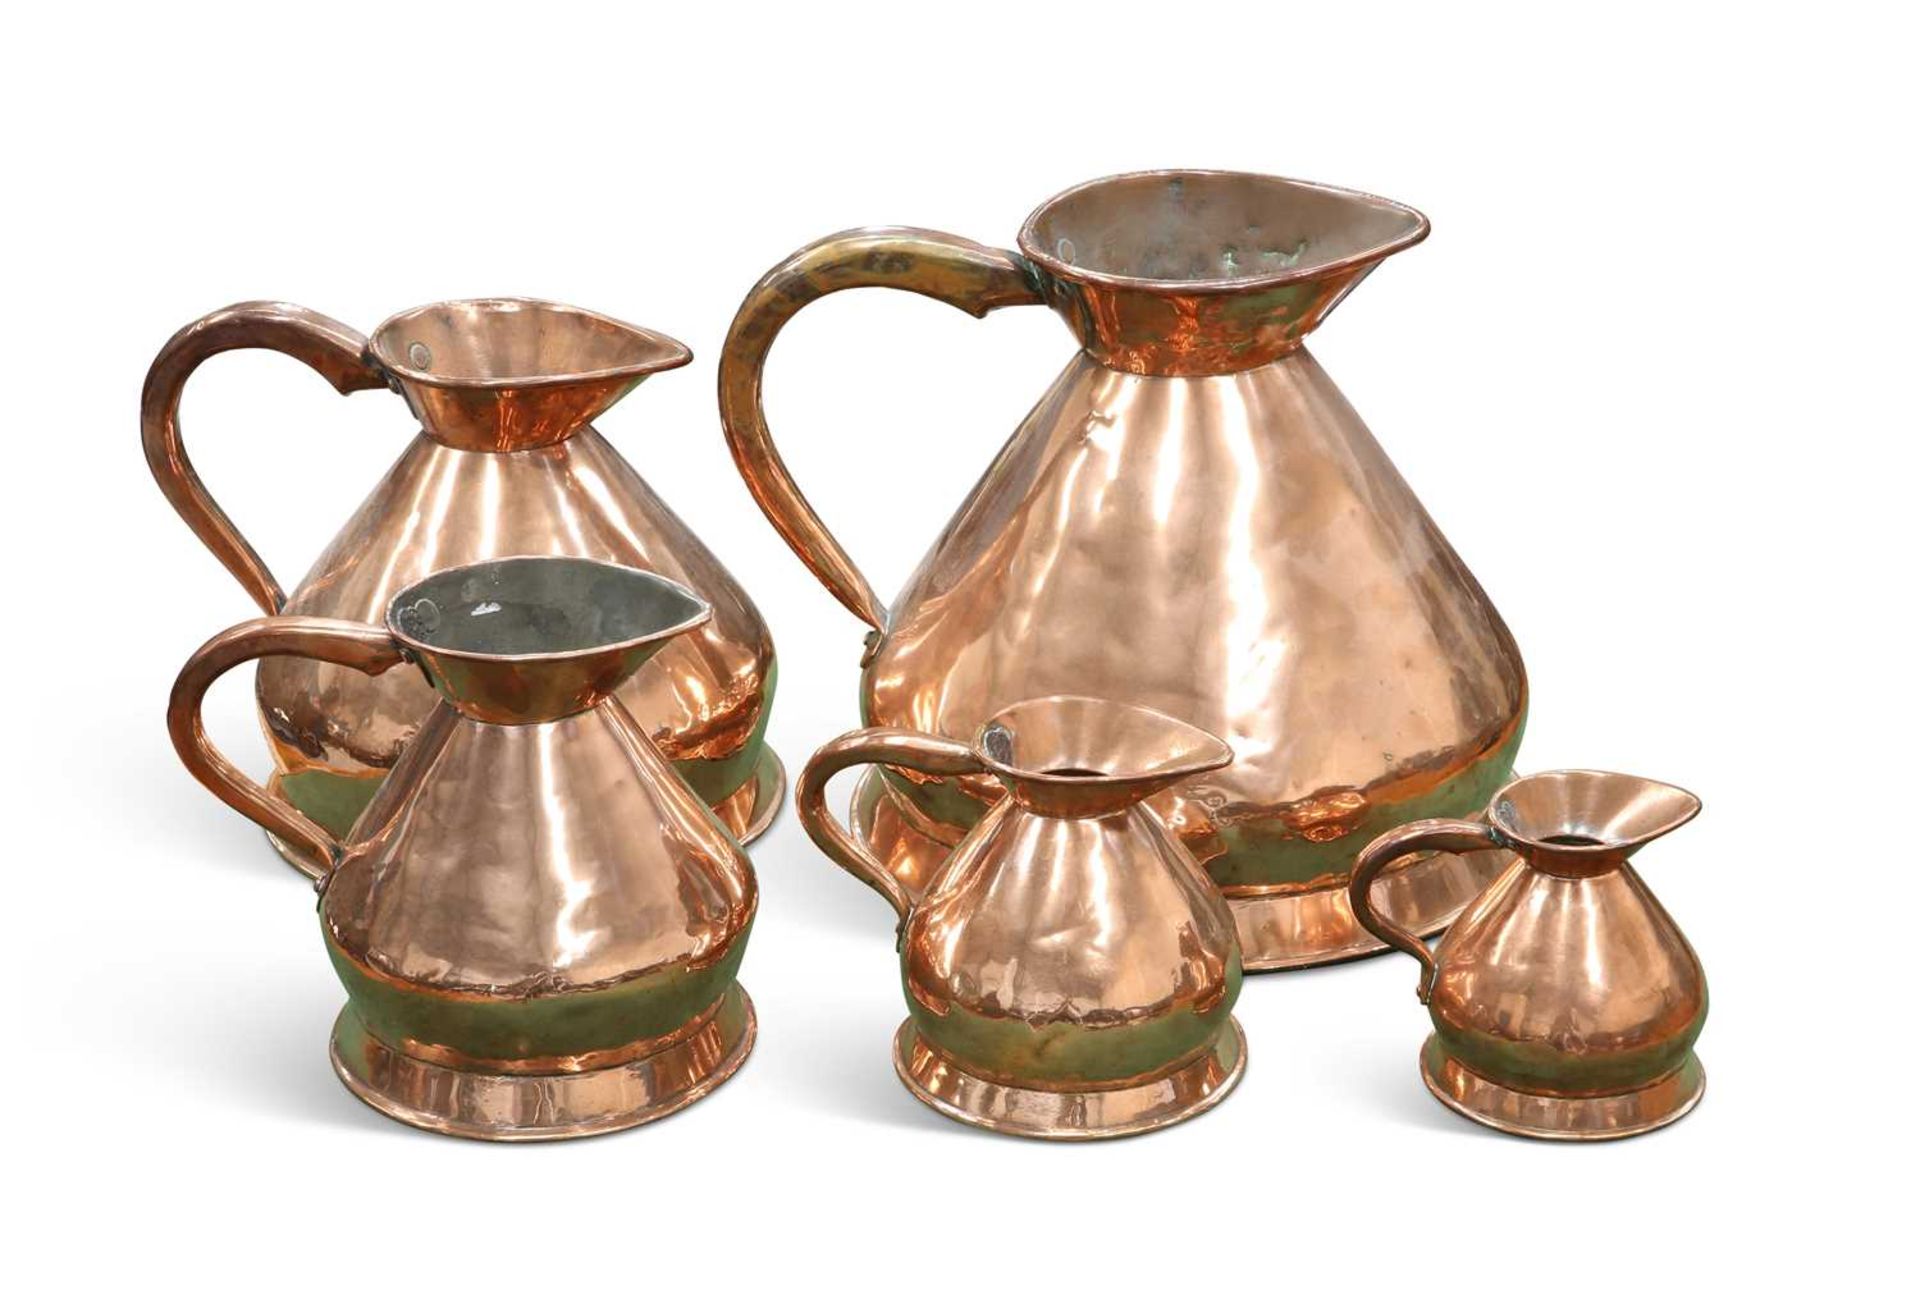 A GRADUATED MATCHED SET OF FIVE 19TH CENTURY COPPER MEASURES